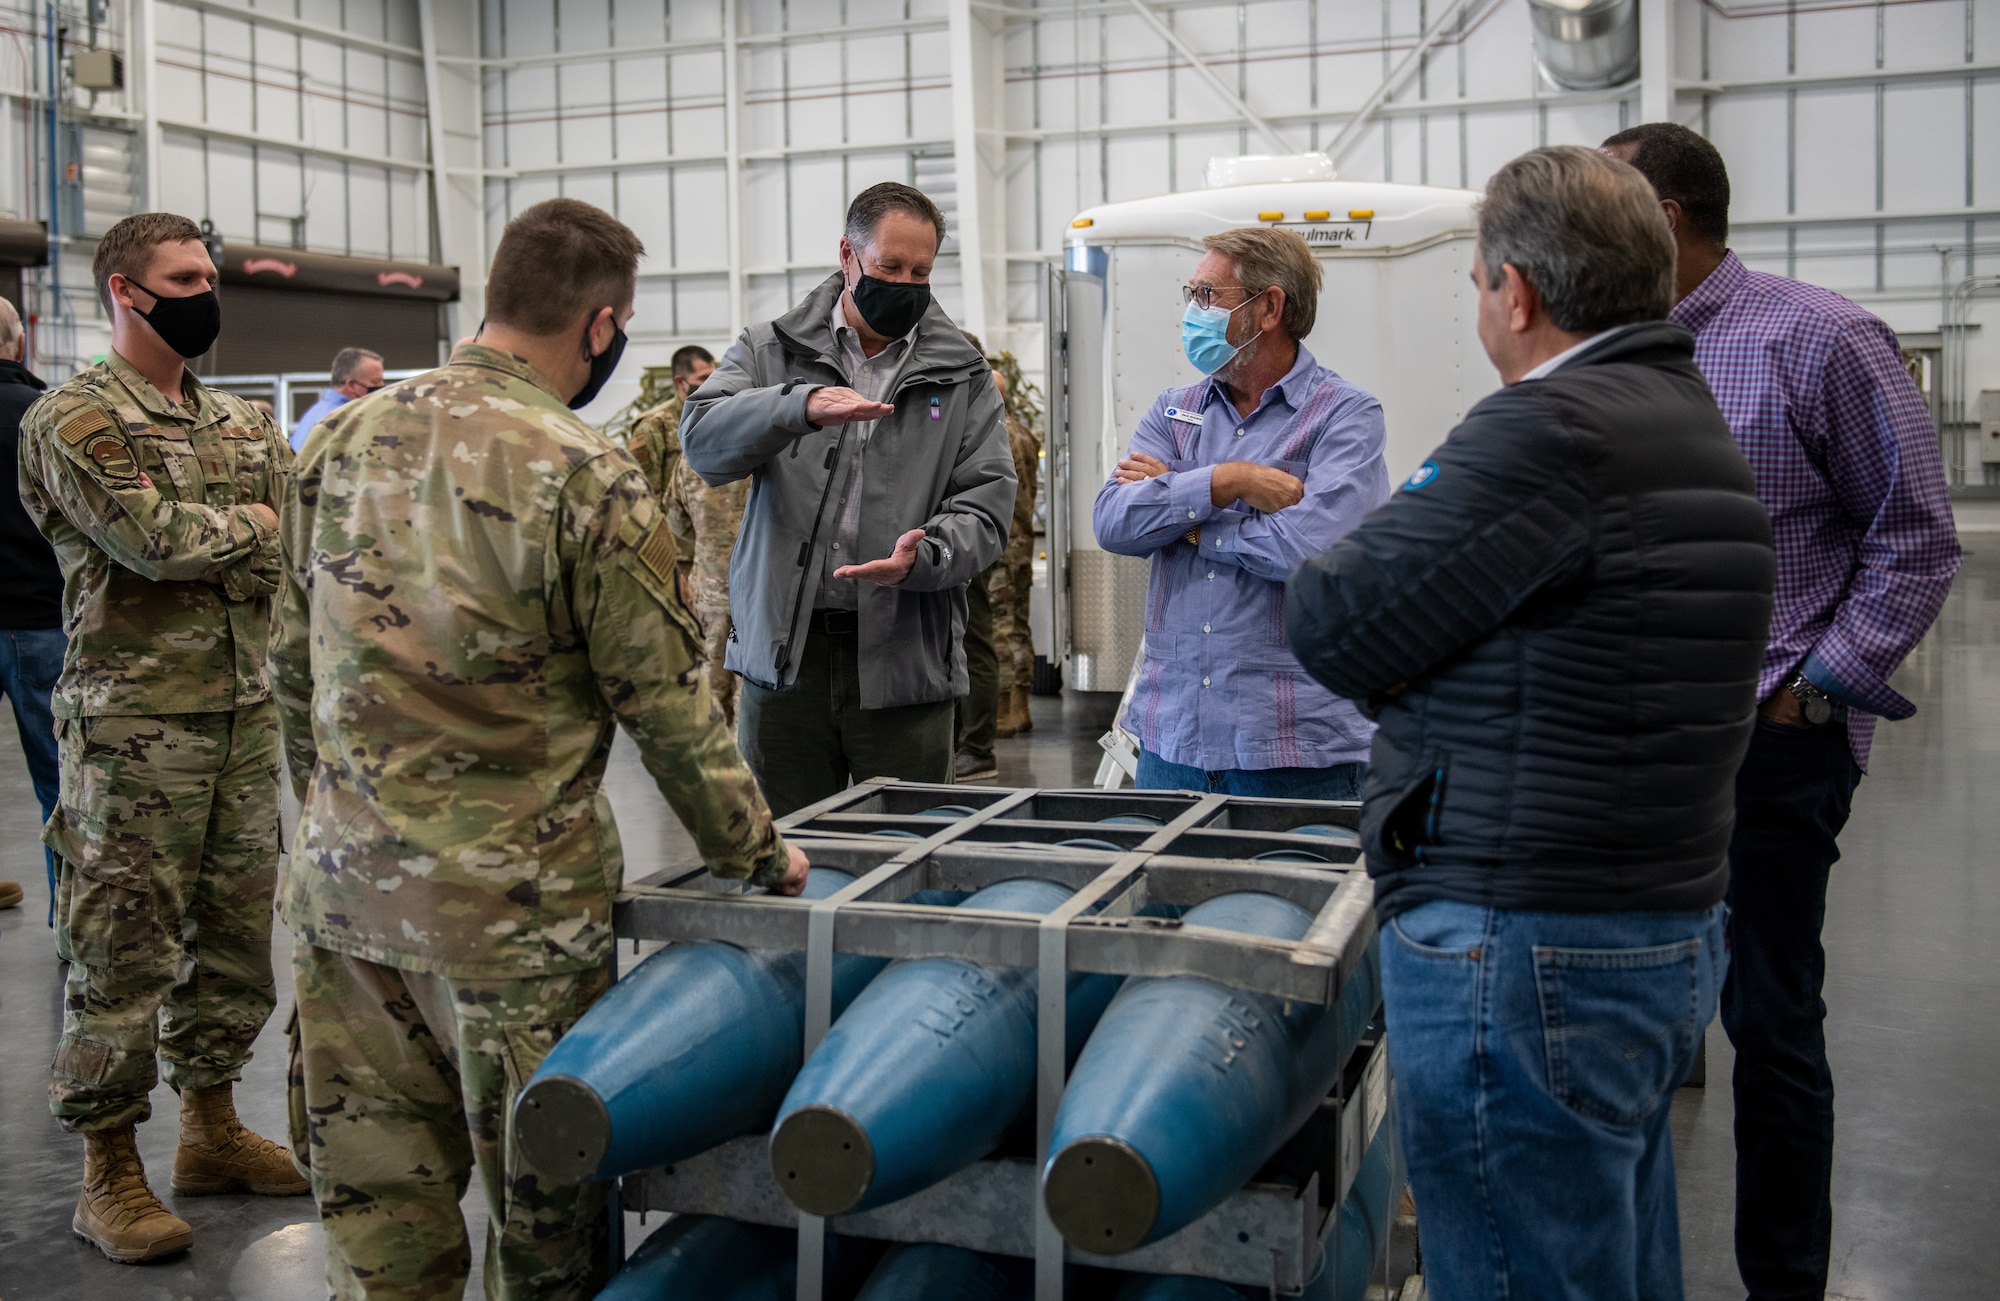 Members from the 649th Munitions Squadron met with attendees during a base visit at Hill Air Force Base, Utah, Nov. 5, 2021. Community leaders from around the U.S. visited Hill as part of the Air and Space Force Civic Leader Program to see the many operational and support missions here.